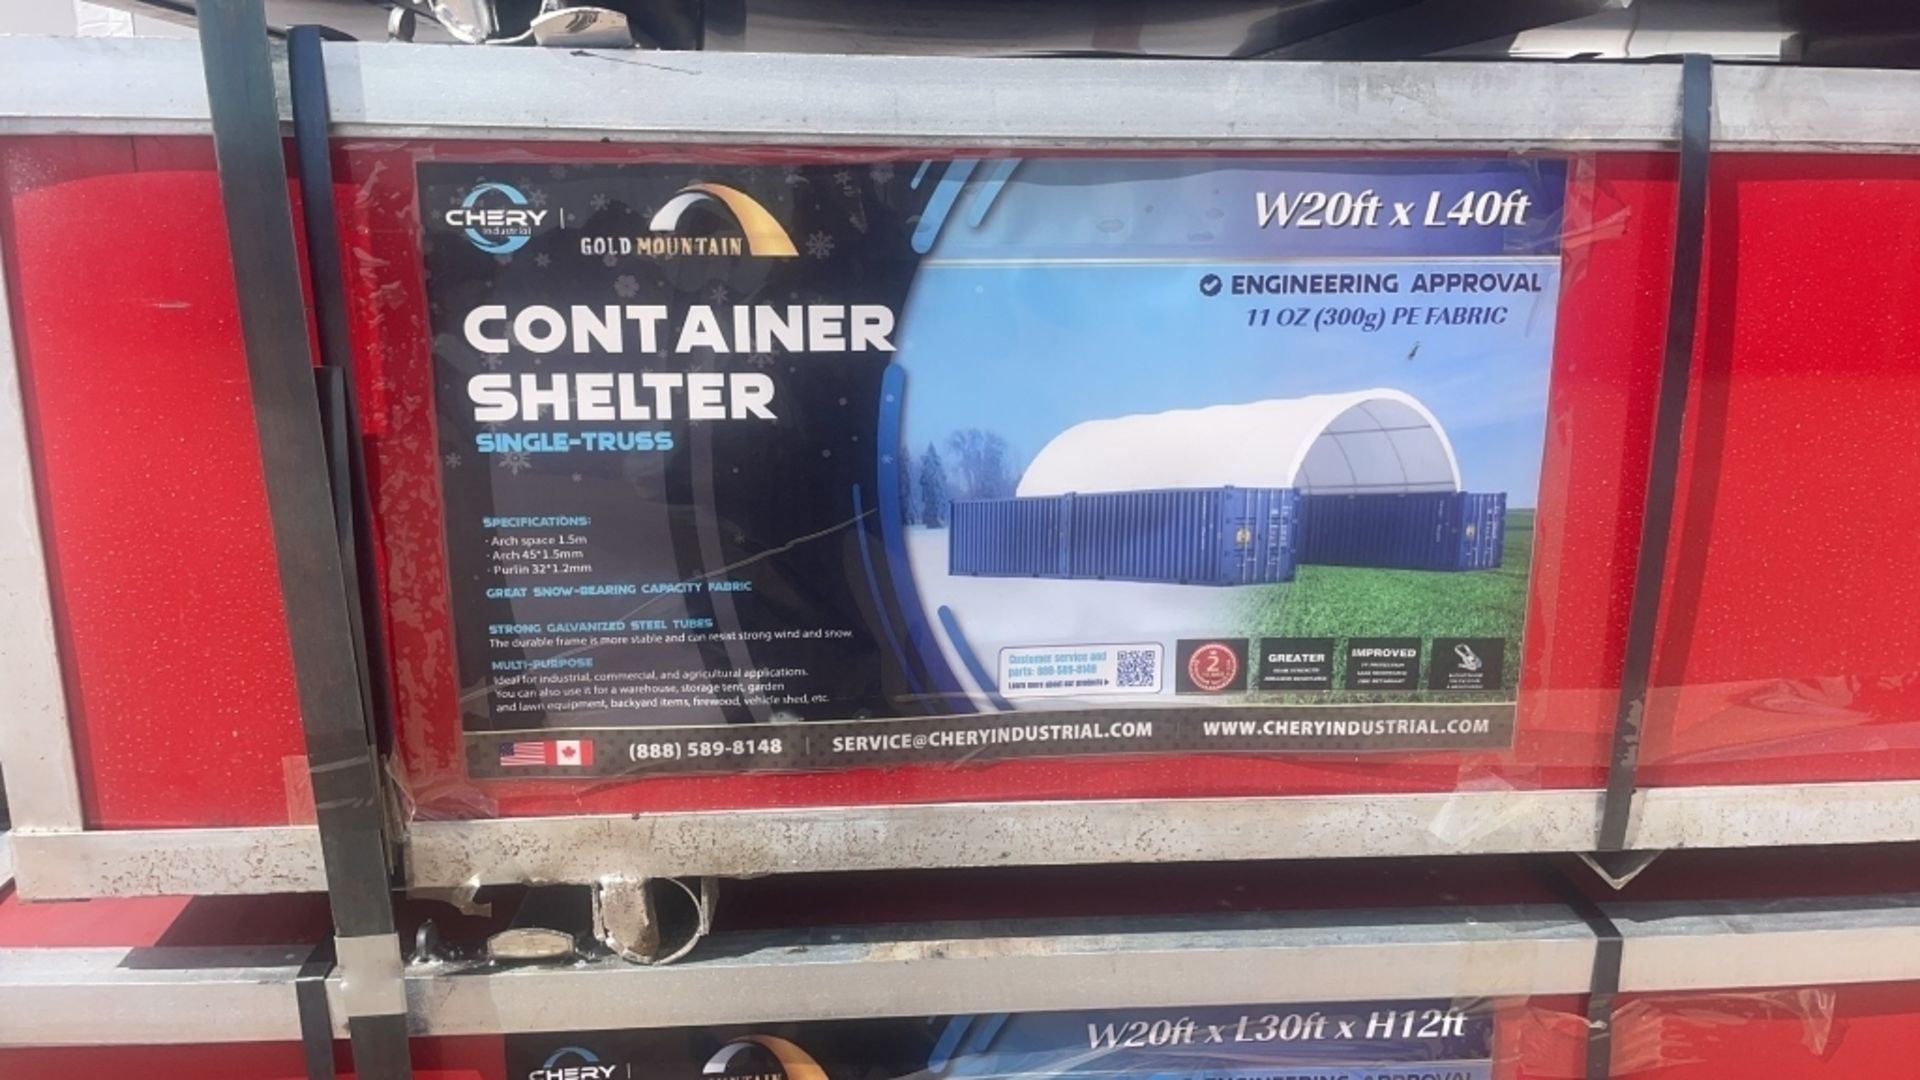 Unused 20x40 Dome Container Shelter in broken box - Image 2 of 4